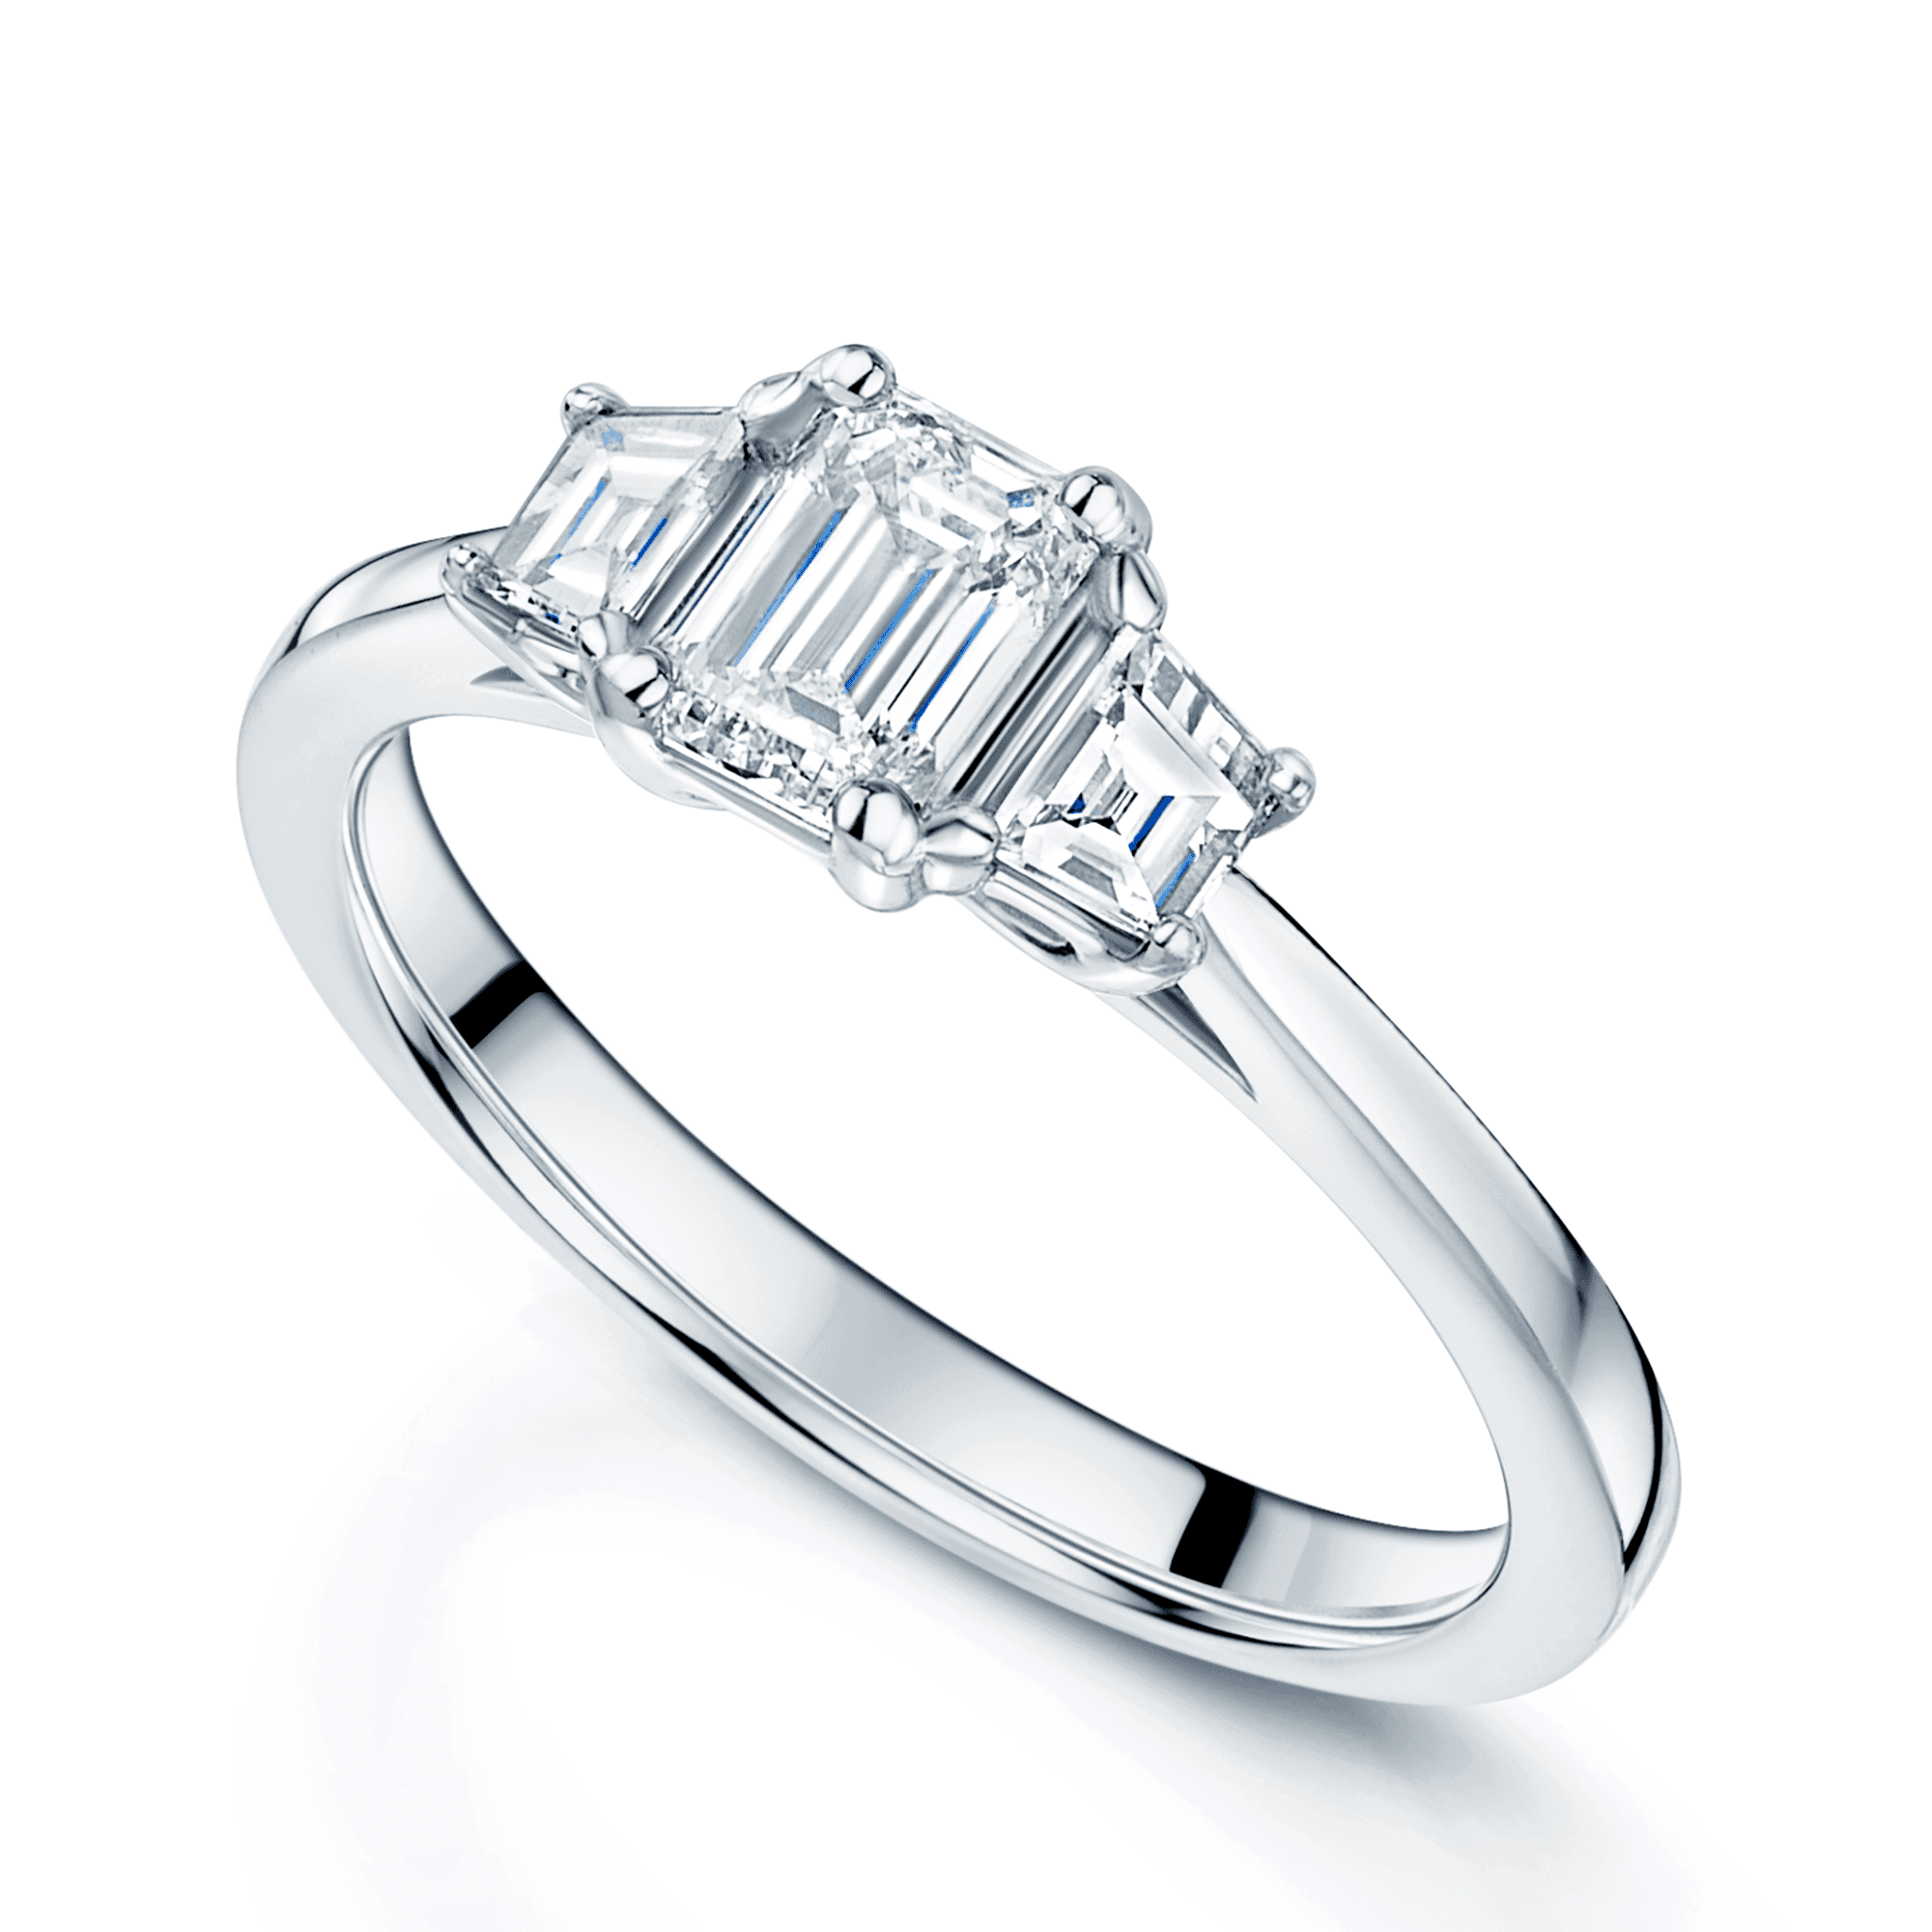 Platinum GIA Certificated Emerald Cut Diamond And Tapered Step Cut Three Stone Ring